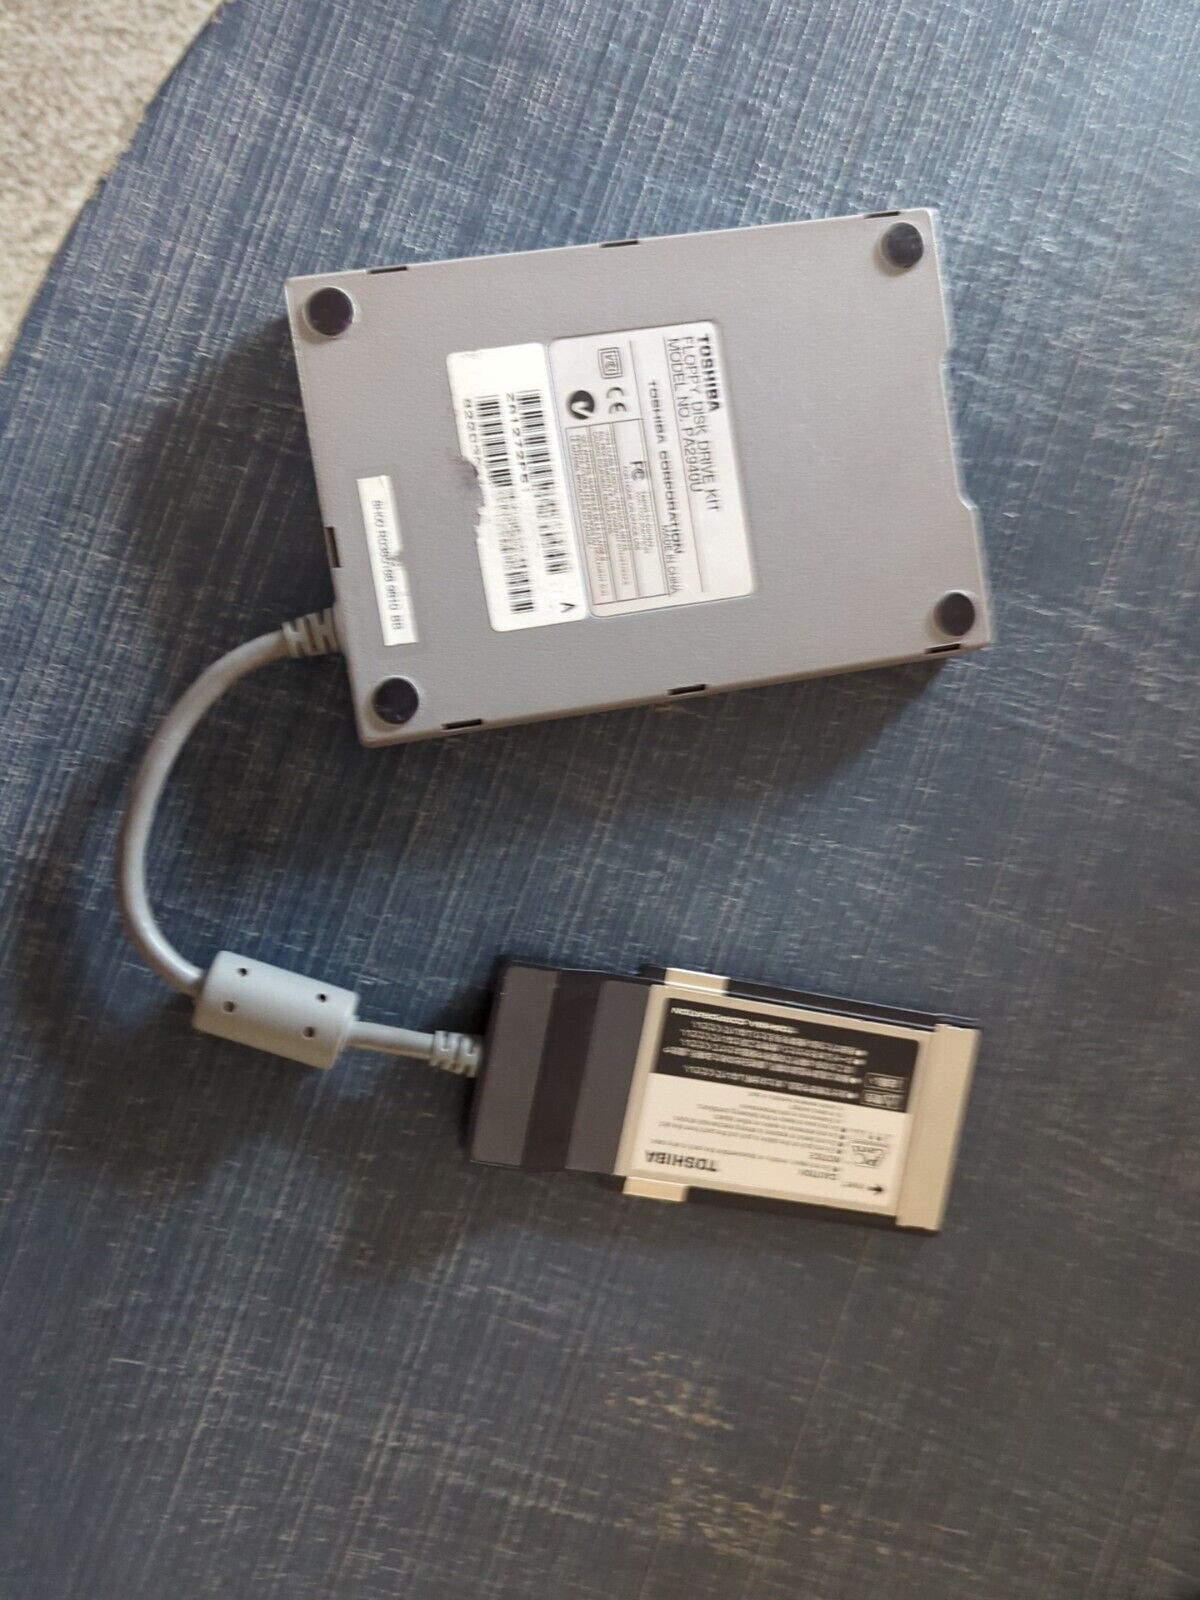 Computer Part: TOSHIBA PA2940U Floppy Disk Drive w/PC Card UN-tested